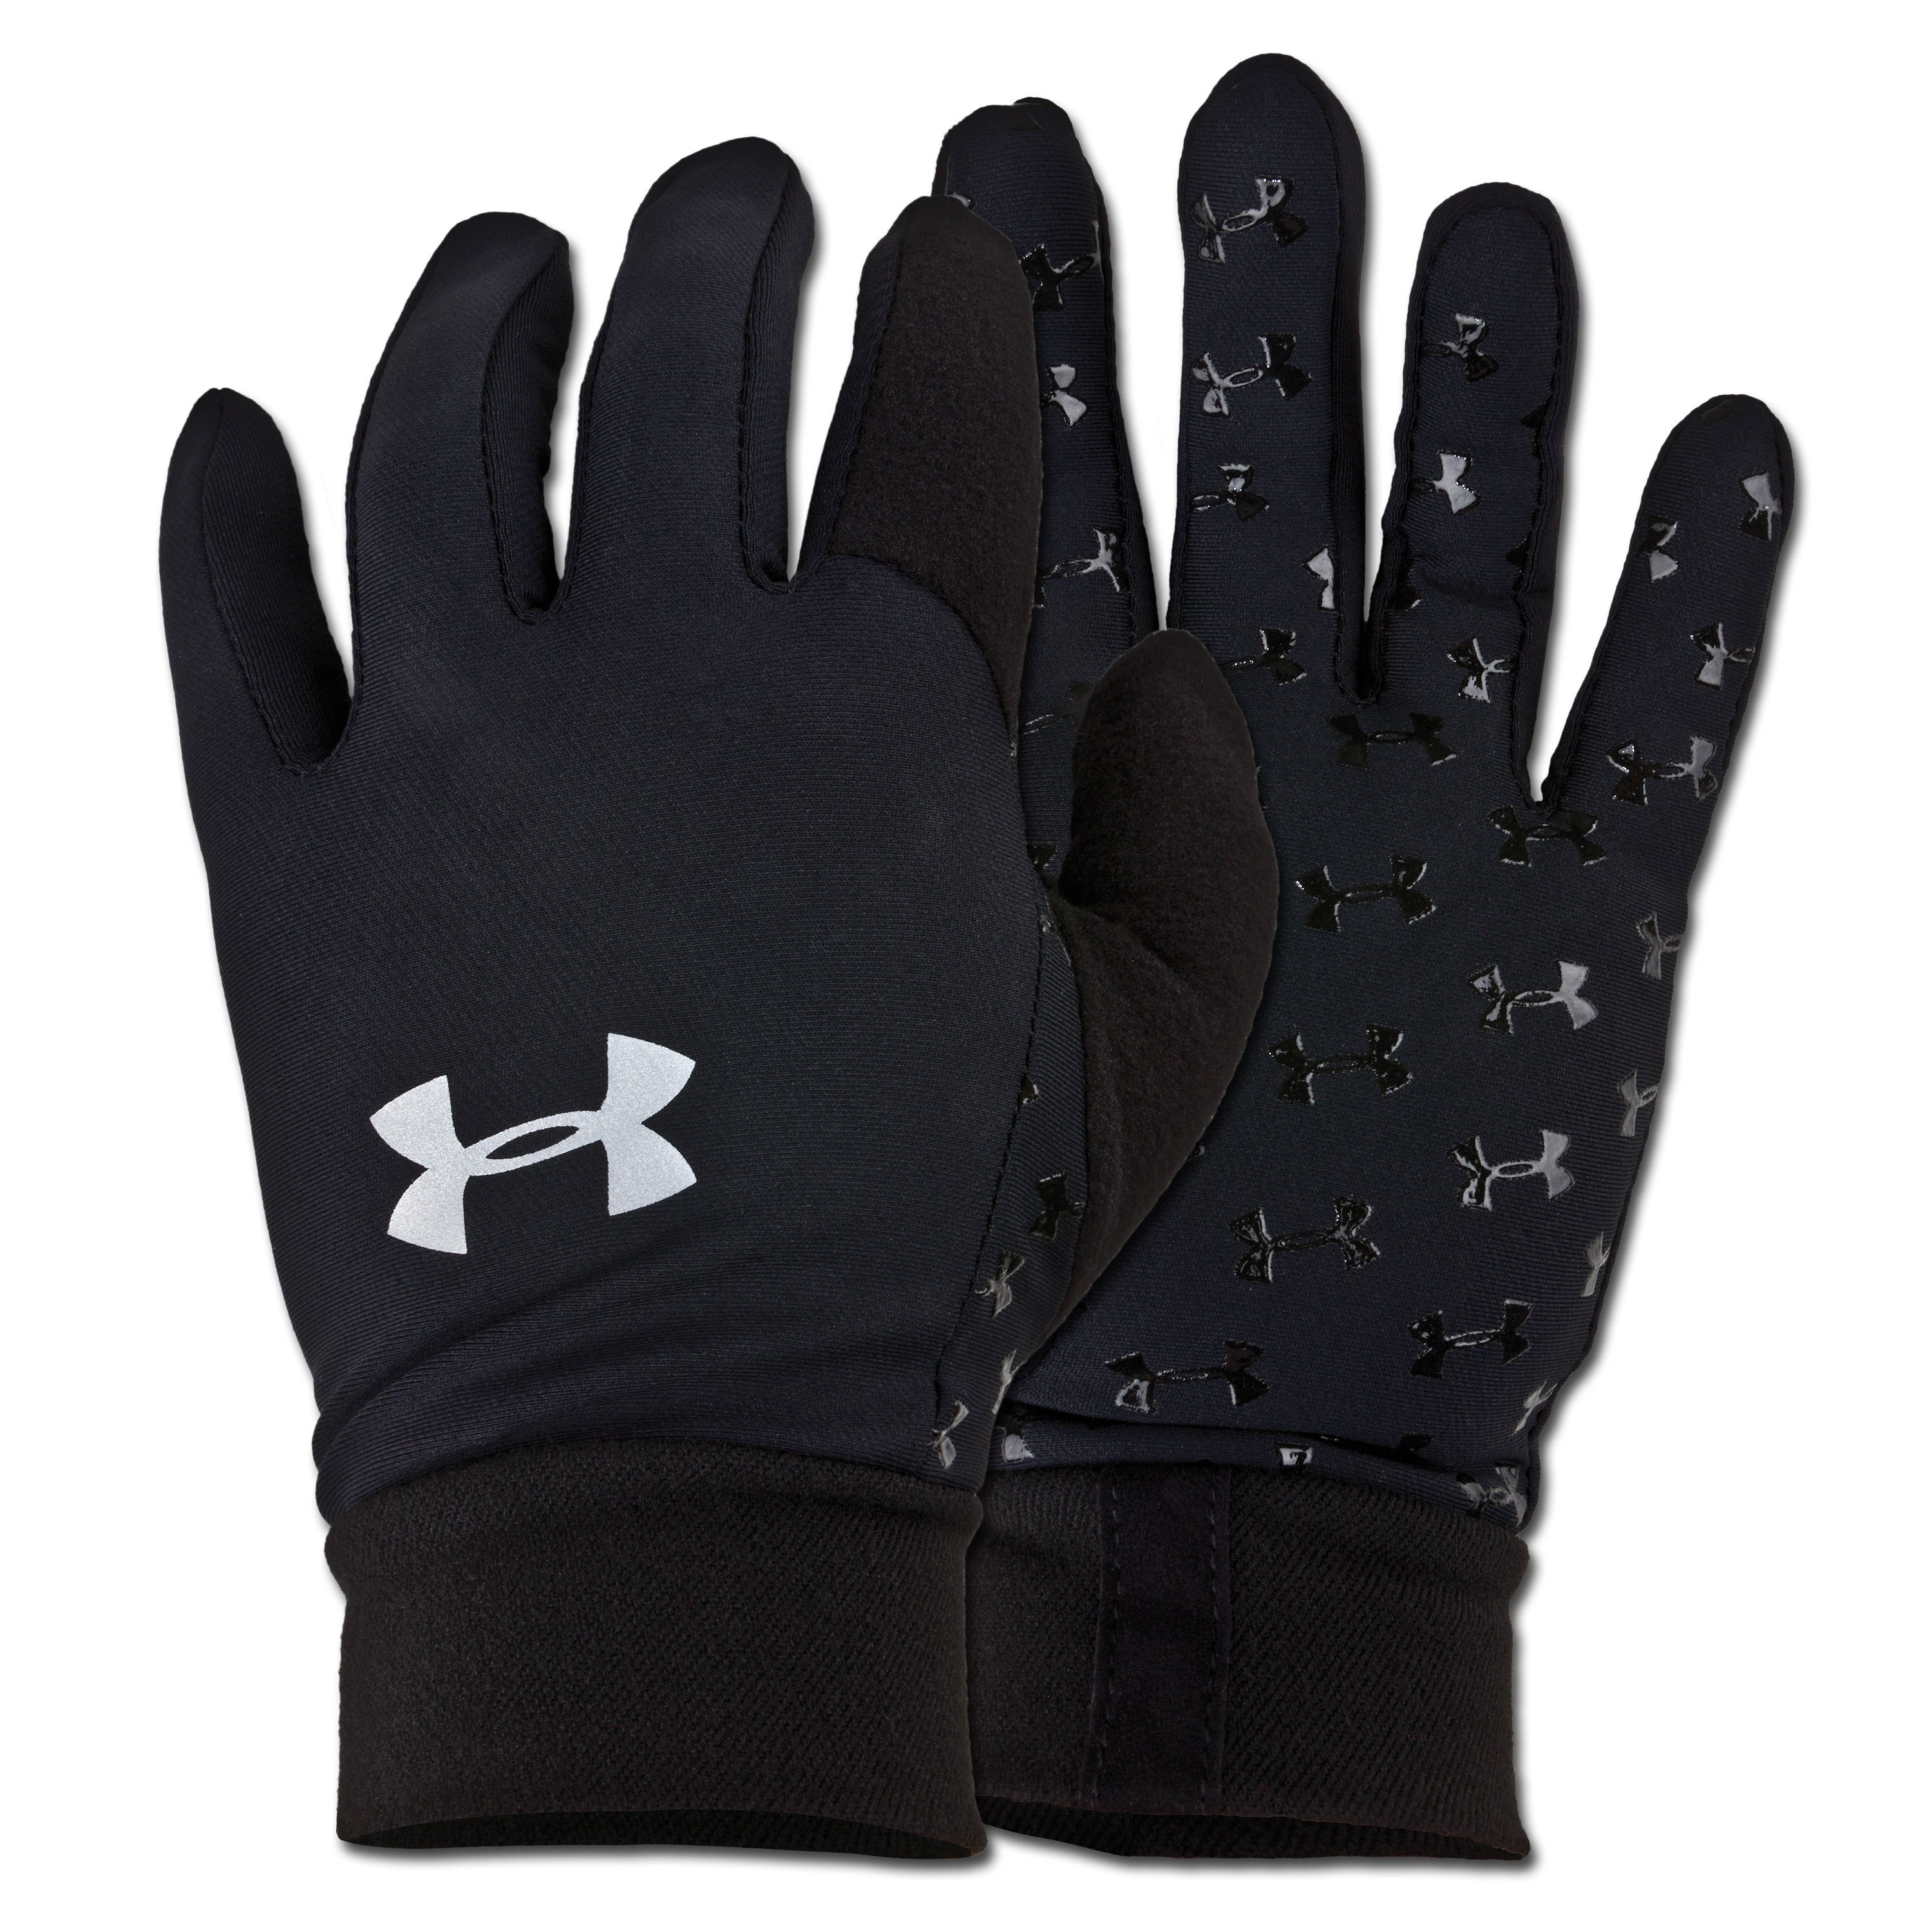 Guantes Under Armour Coldgear Liner | Guantes Under Armour Coldgear | Otros guantes | Guantes | Caballeros | Indumentaria